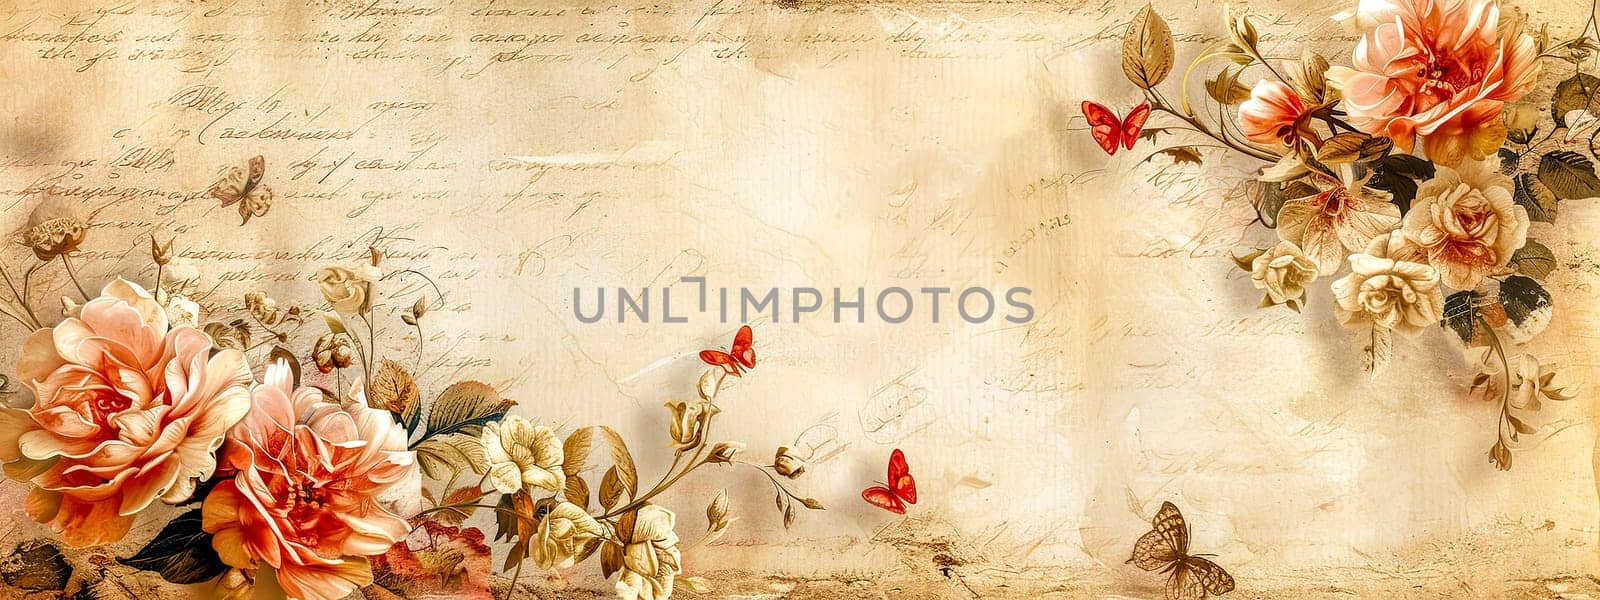 Elegant Vintage Floral and Butterfly Wallpaper - Antique Roses with Handwritten Script Background by Edophoto